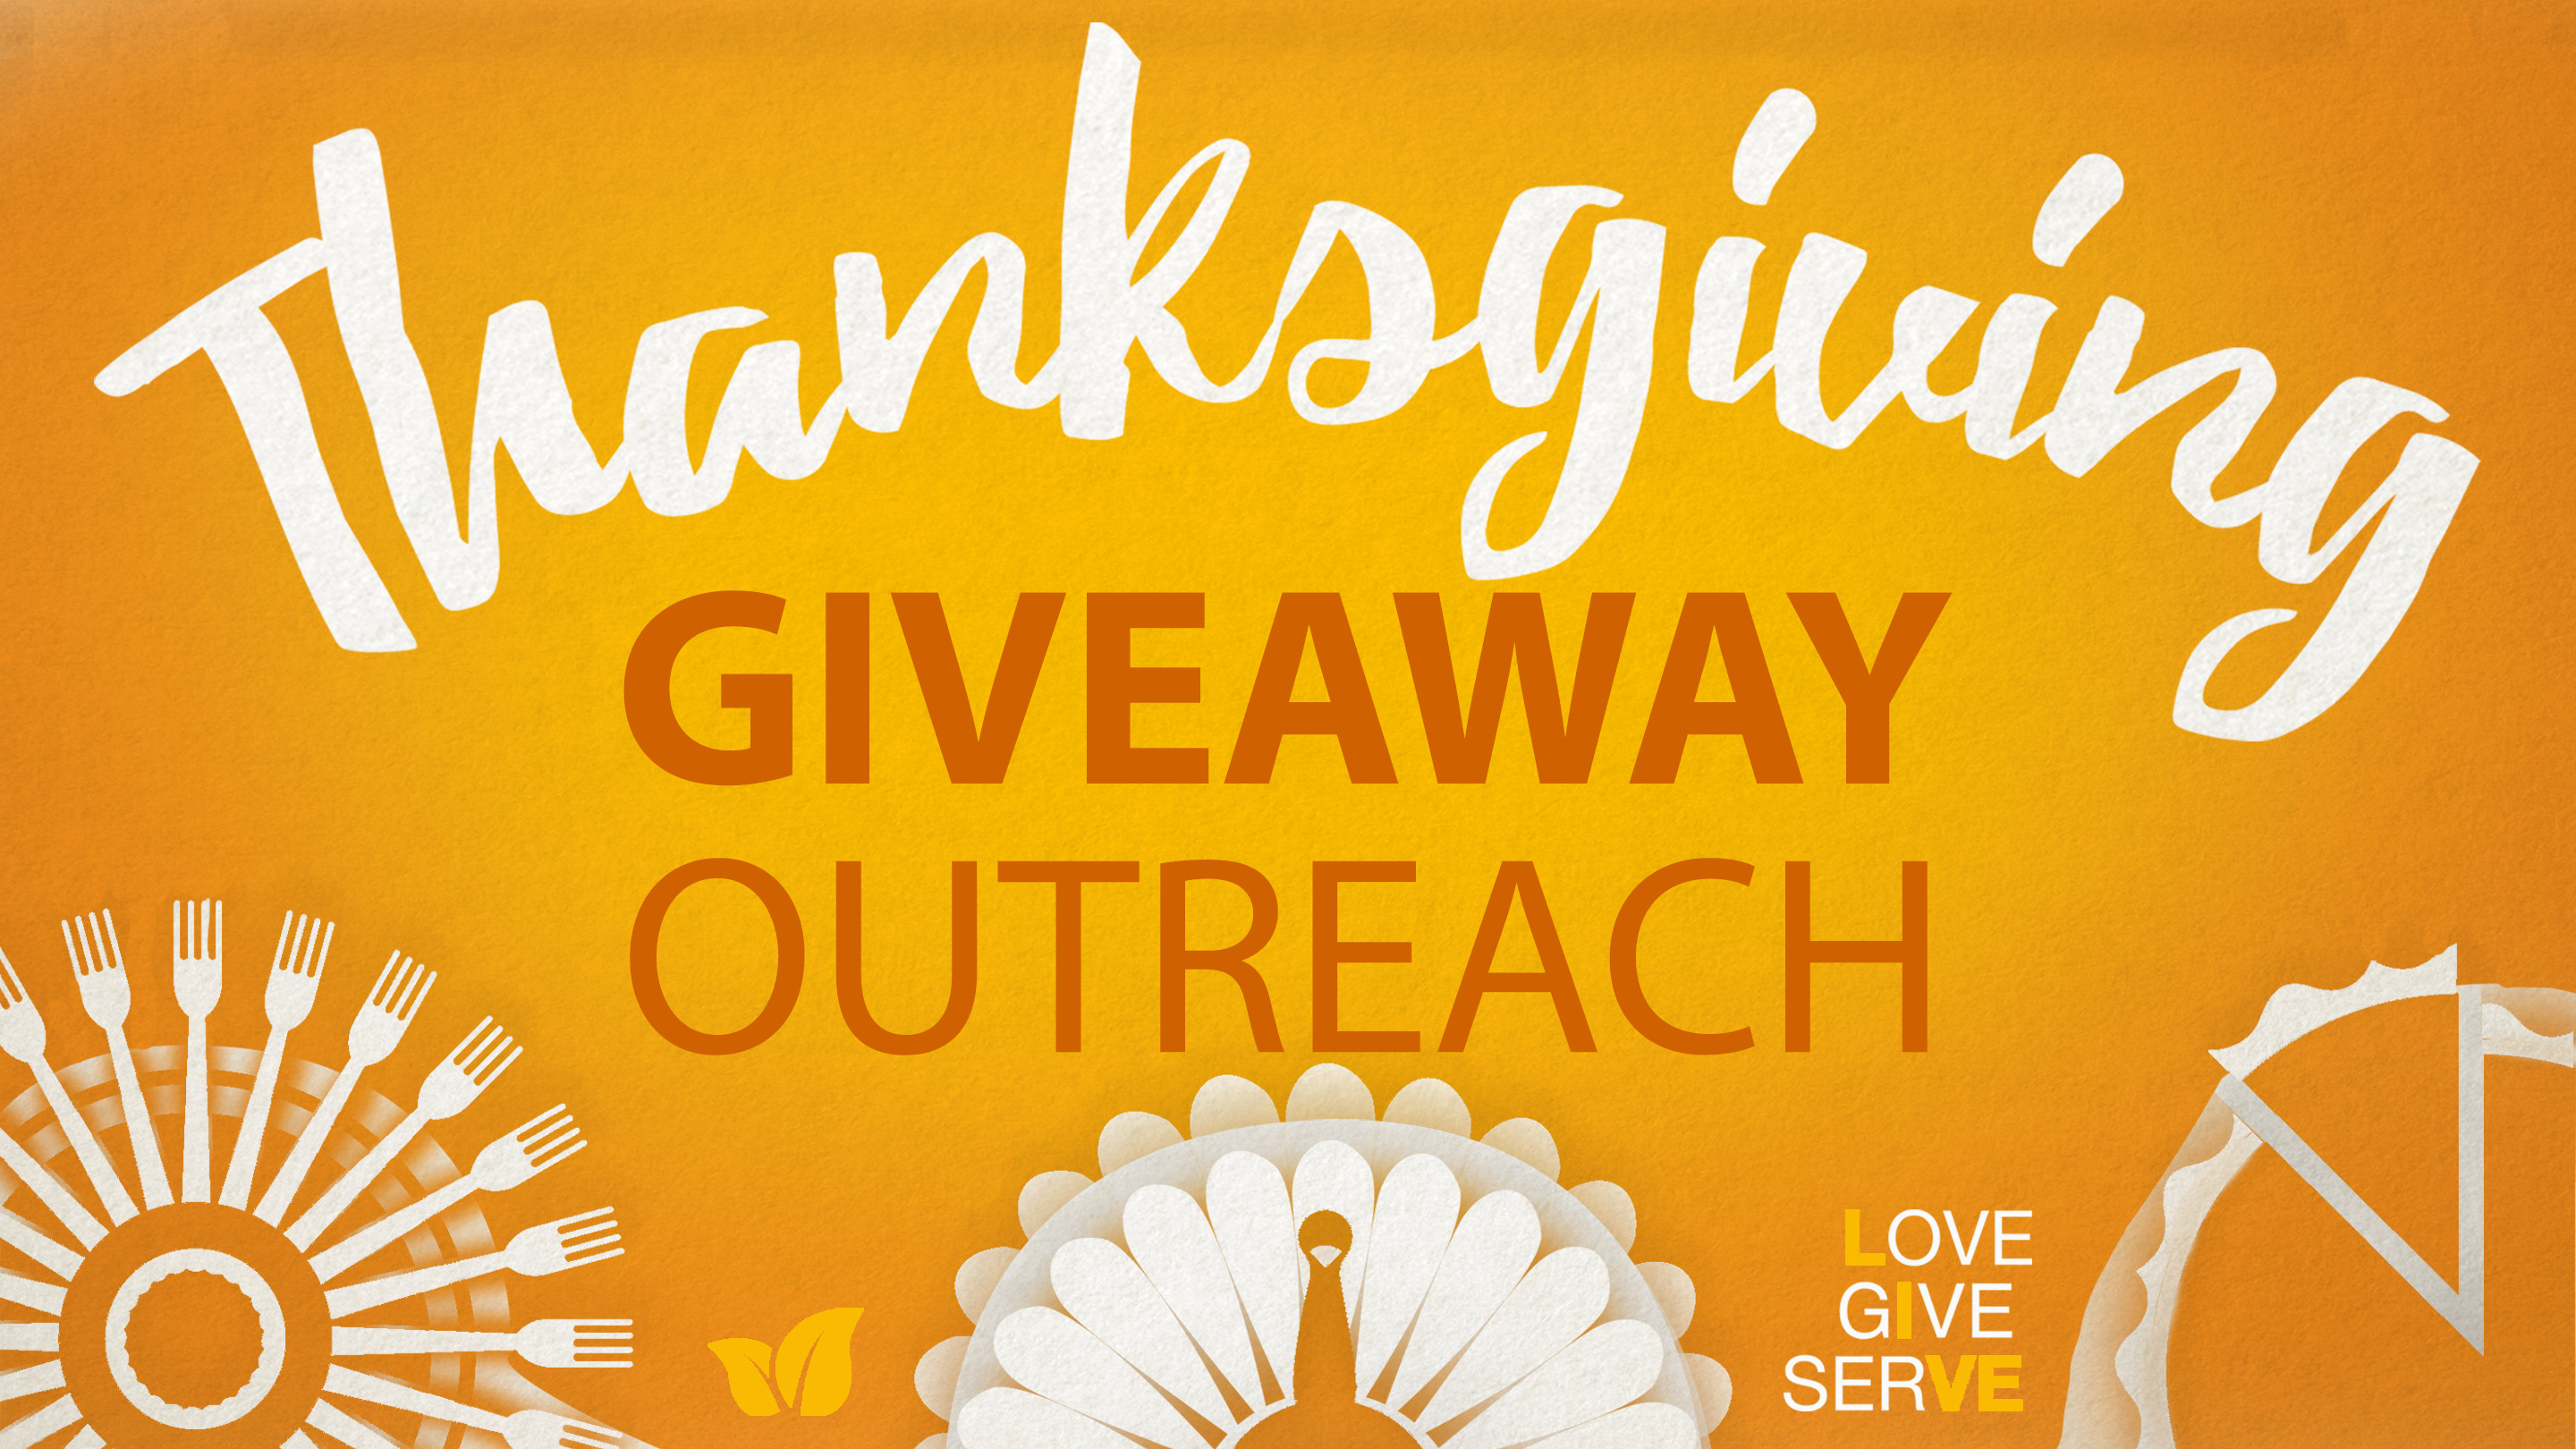 Best 30 Thanksgiving Turkey Giveaway Most Popular Ideas of All Time